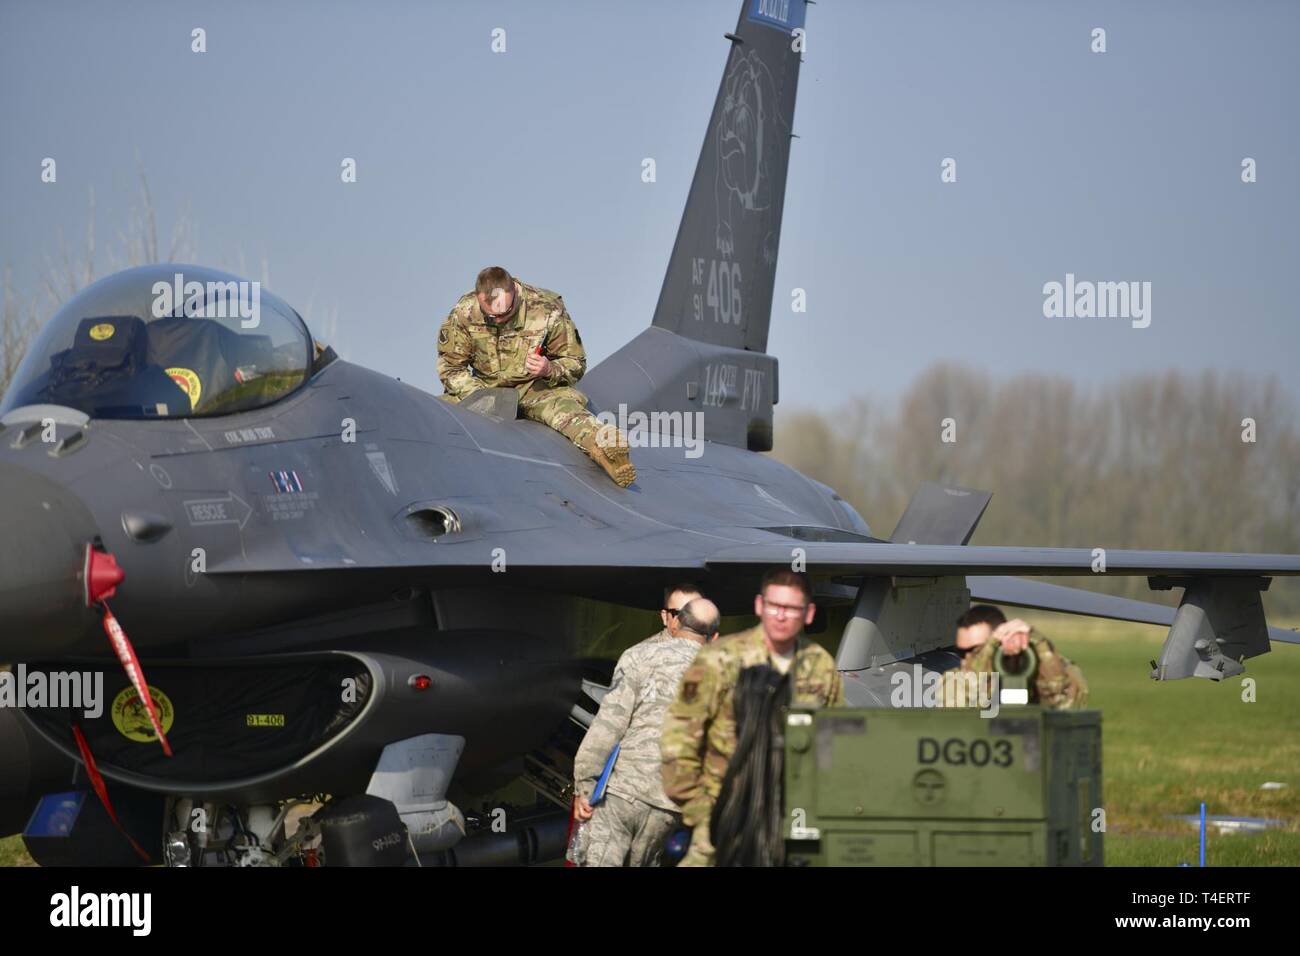 Airmen from the 148th Maintenance Group from the Duluth, Minn. based 148th Fighter Wing recovered and performed routine maintenance activities for F-16 Aircraft for the 2019 Frisian Flag held at Leeuwarden Air Base, March 30, 2019.  Frisian Flag is a 12-day NATO partnership exercise in the Netherlands that will allow all international participants of the exercise to execute training on operational tactics in a global setting with multiple coalition partners like Germany, Poland, France, and the United States who are participating in this year’s event. Stock Photo